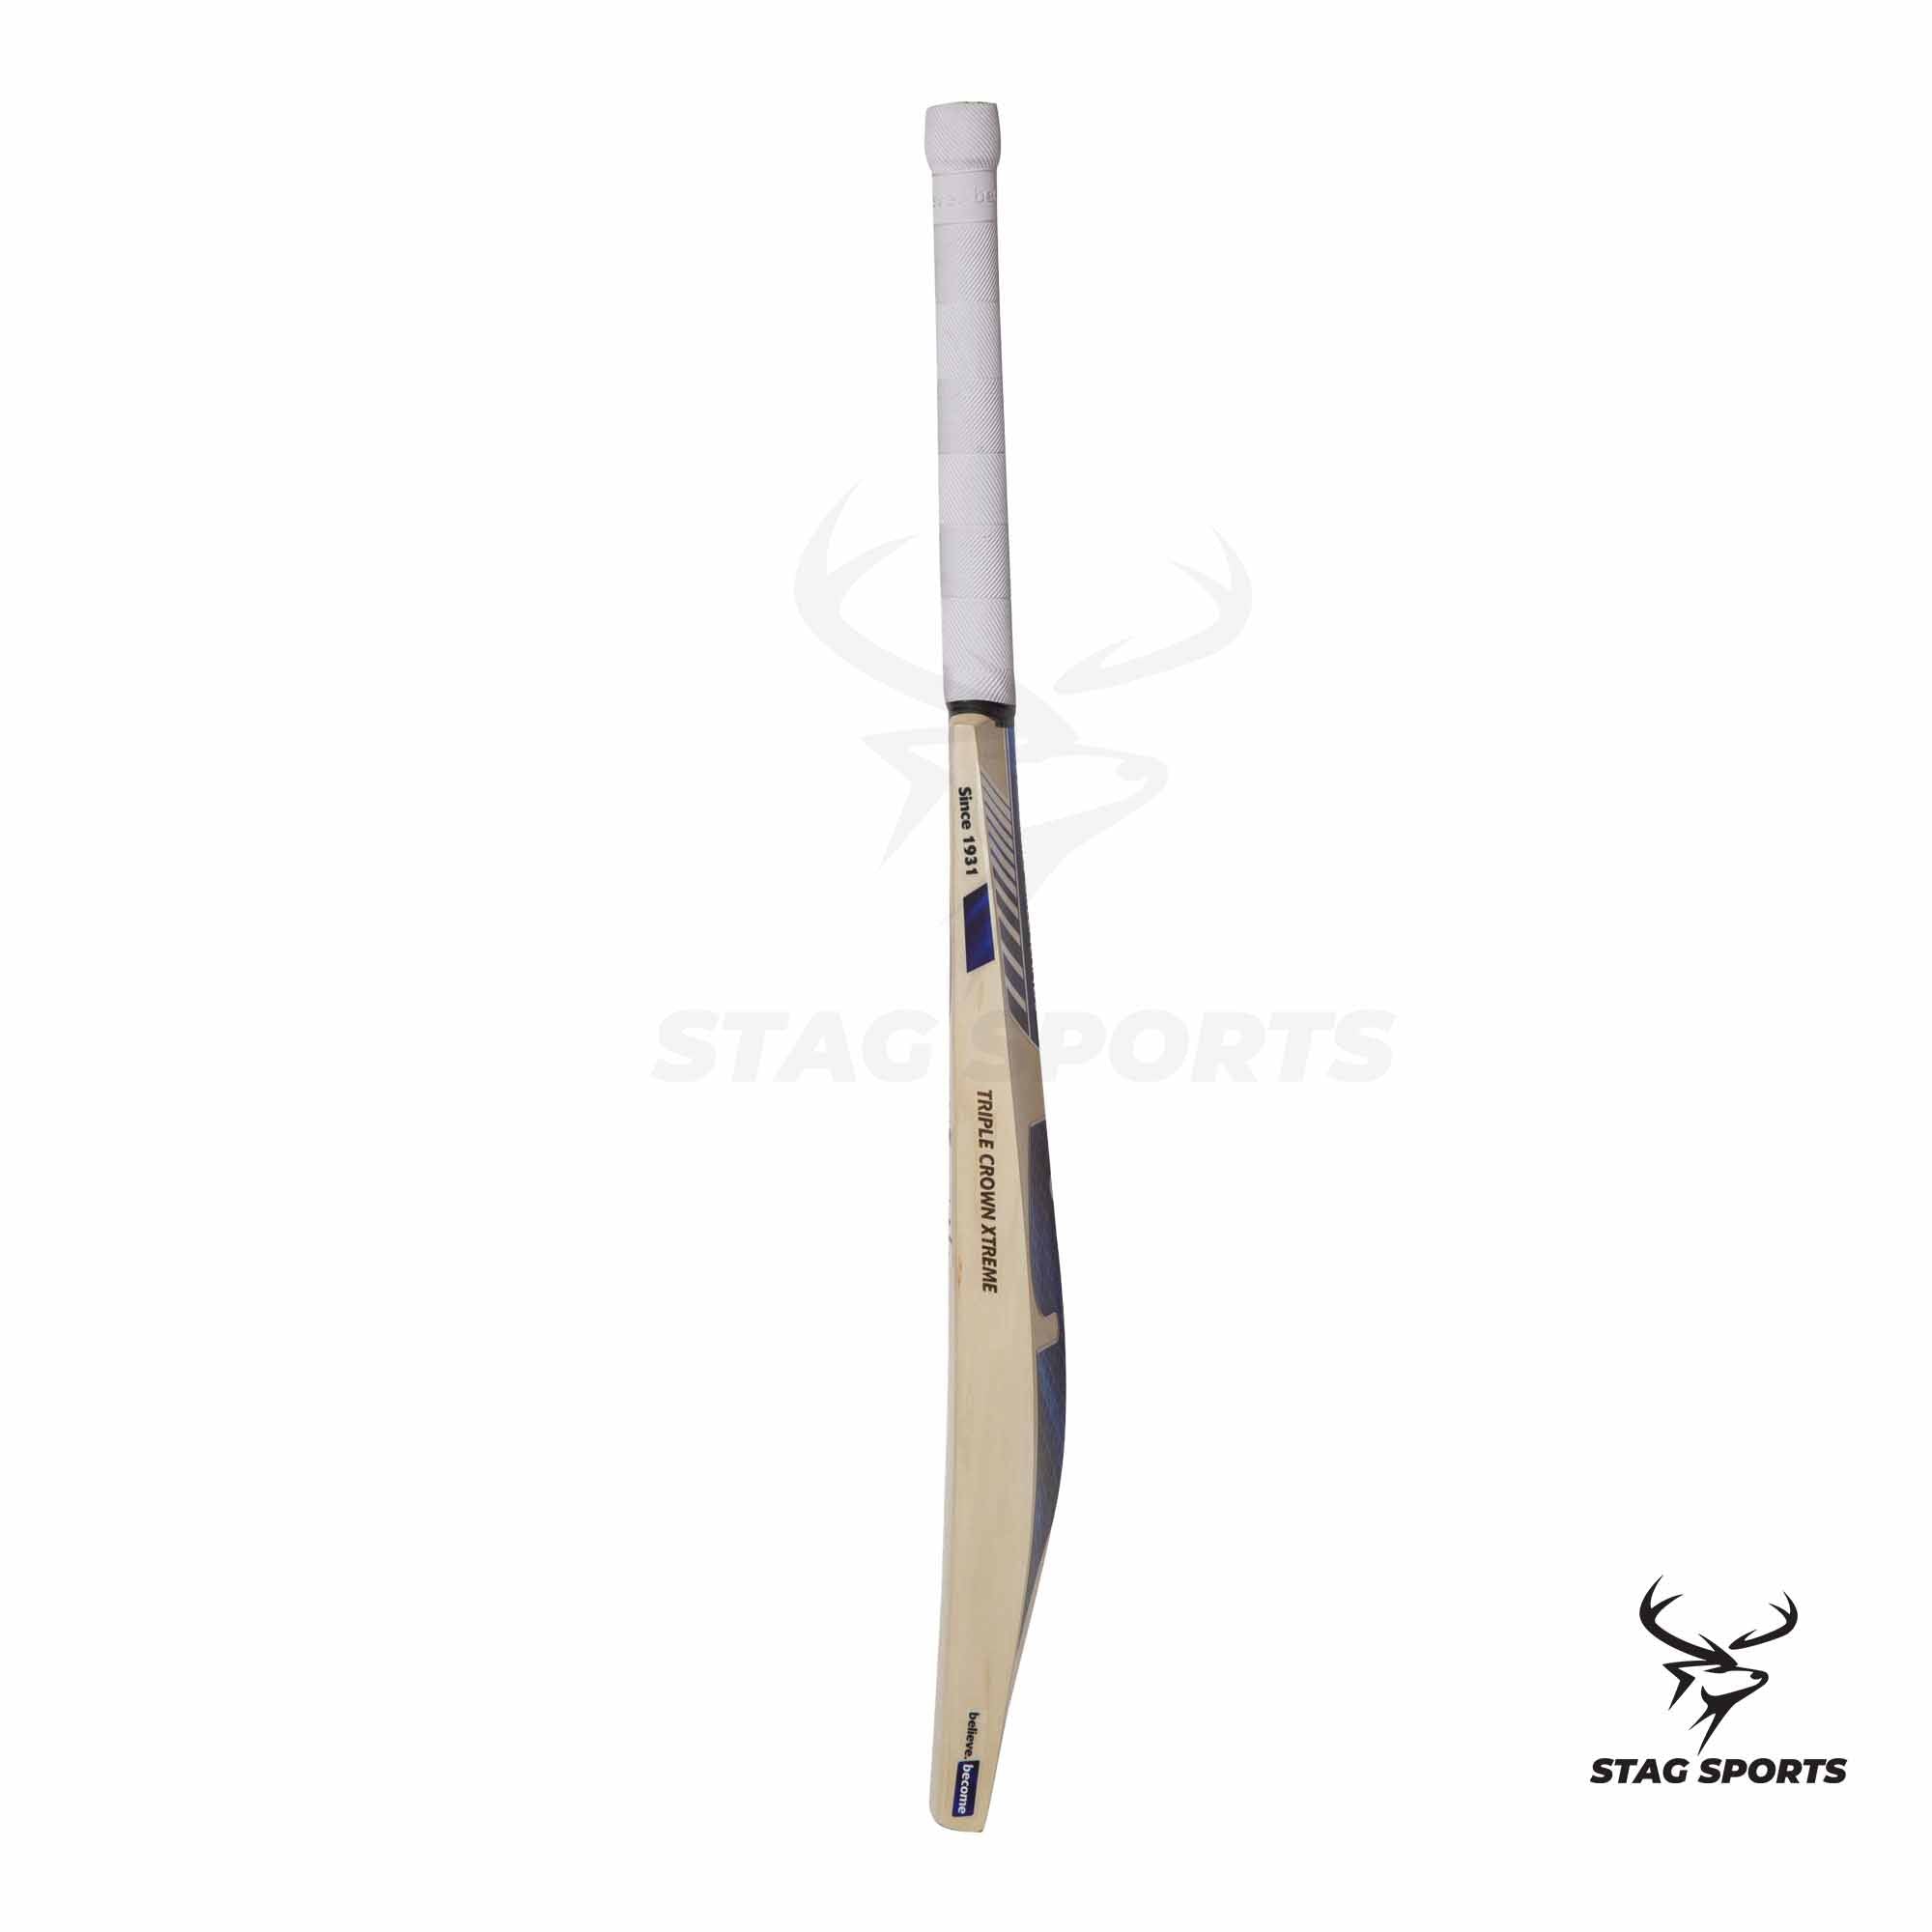 SG TRIPLE CROWN XTSG Triple Crown Xtreme English Willow Cricket Bat buy from stagsportsSG Triple Crown Xtreme English Willow Cricket Bat buy from stagsports